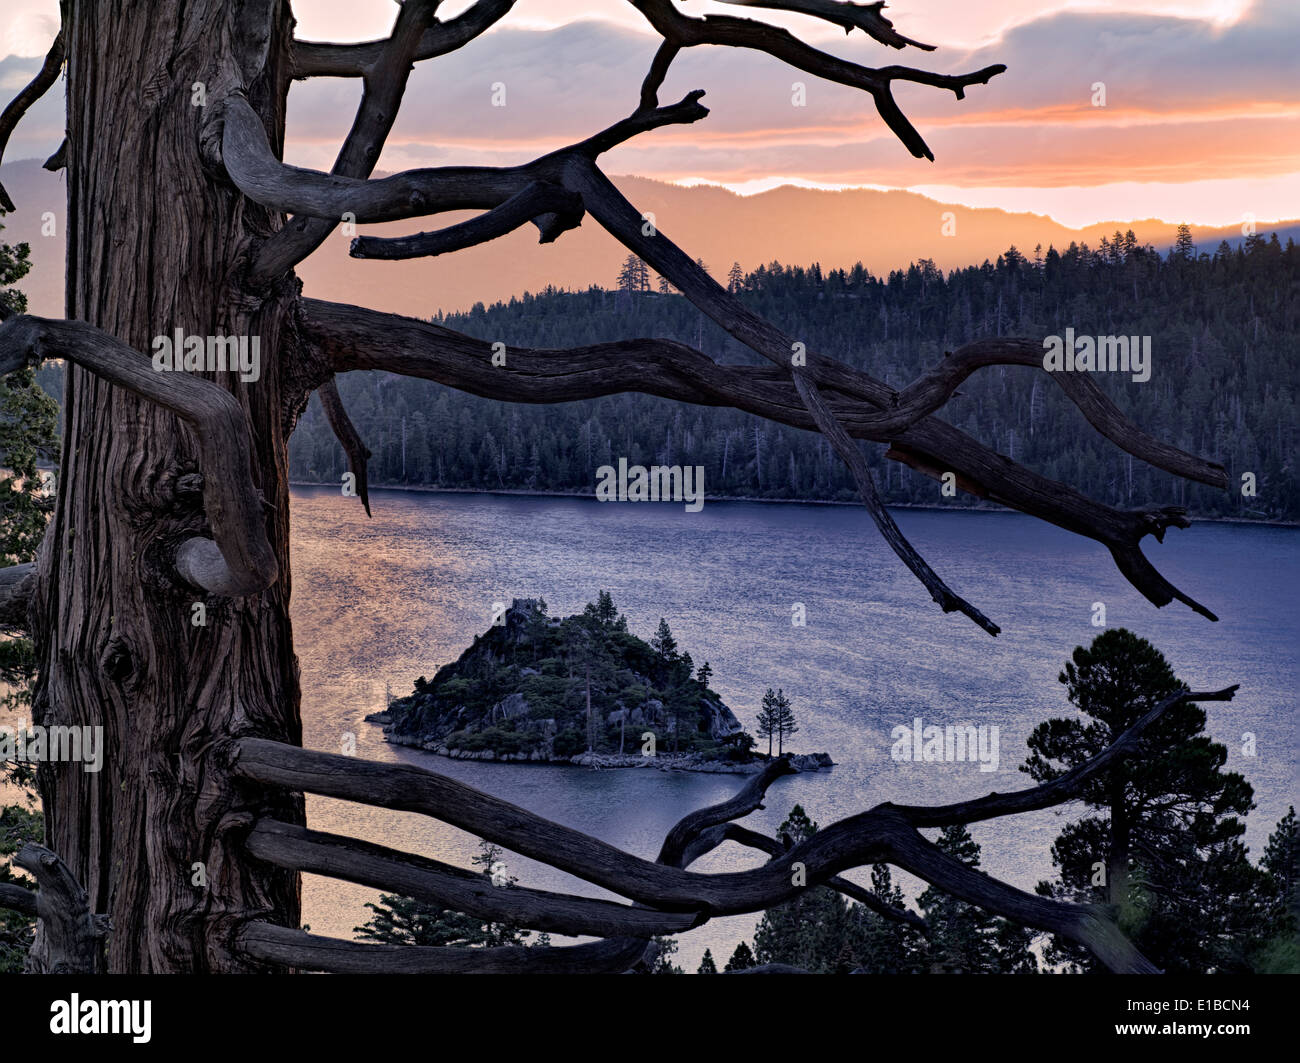 Sunrise over Emerald Bay with dead tree and Fannette Island, Lake Tahoe, California. Stock Photo